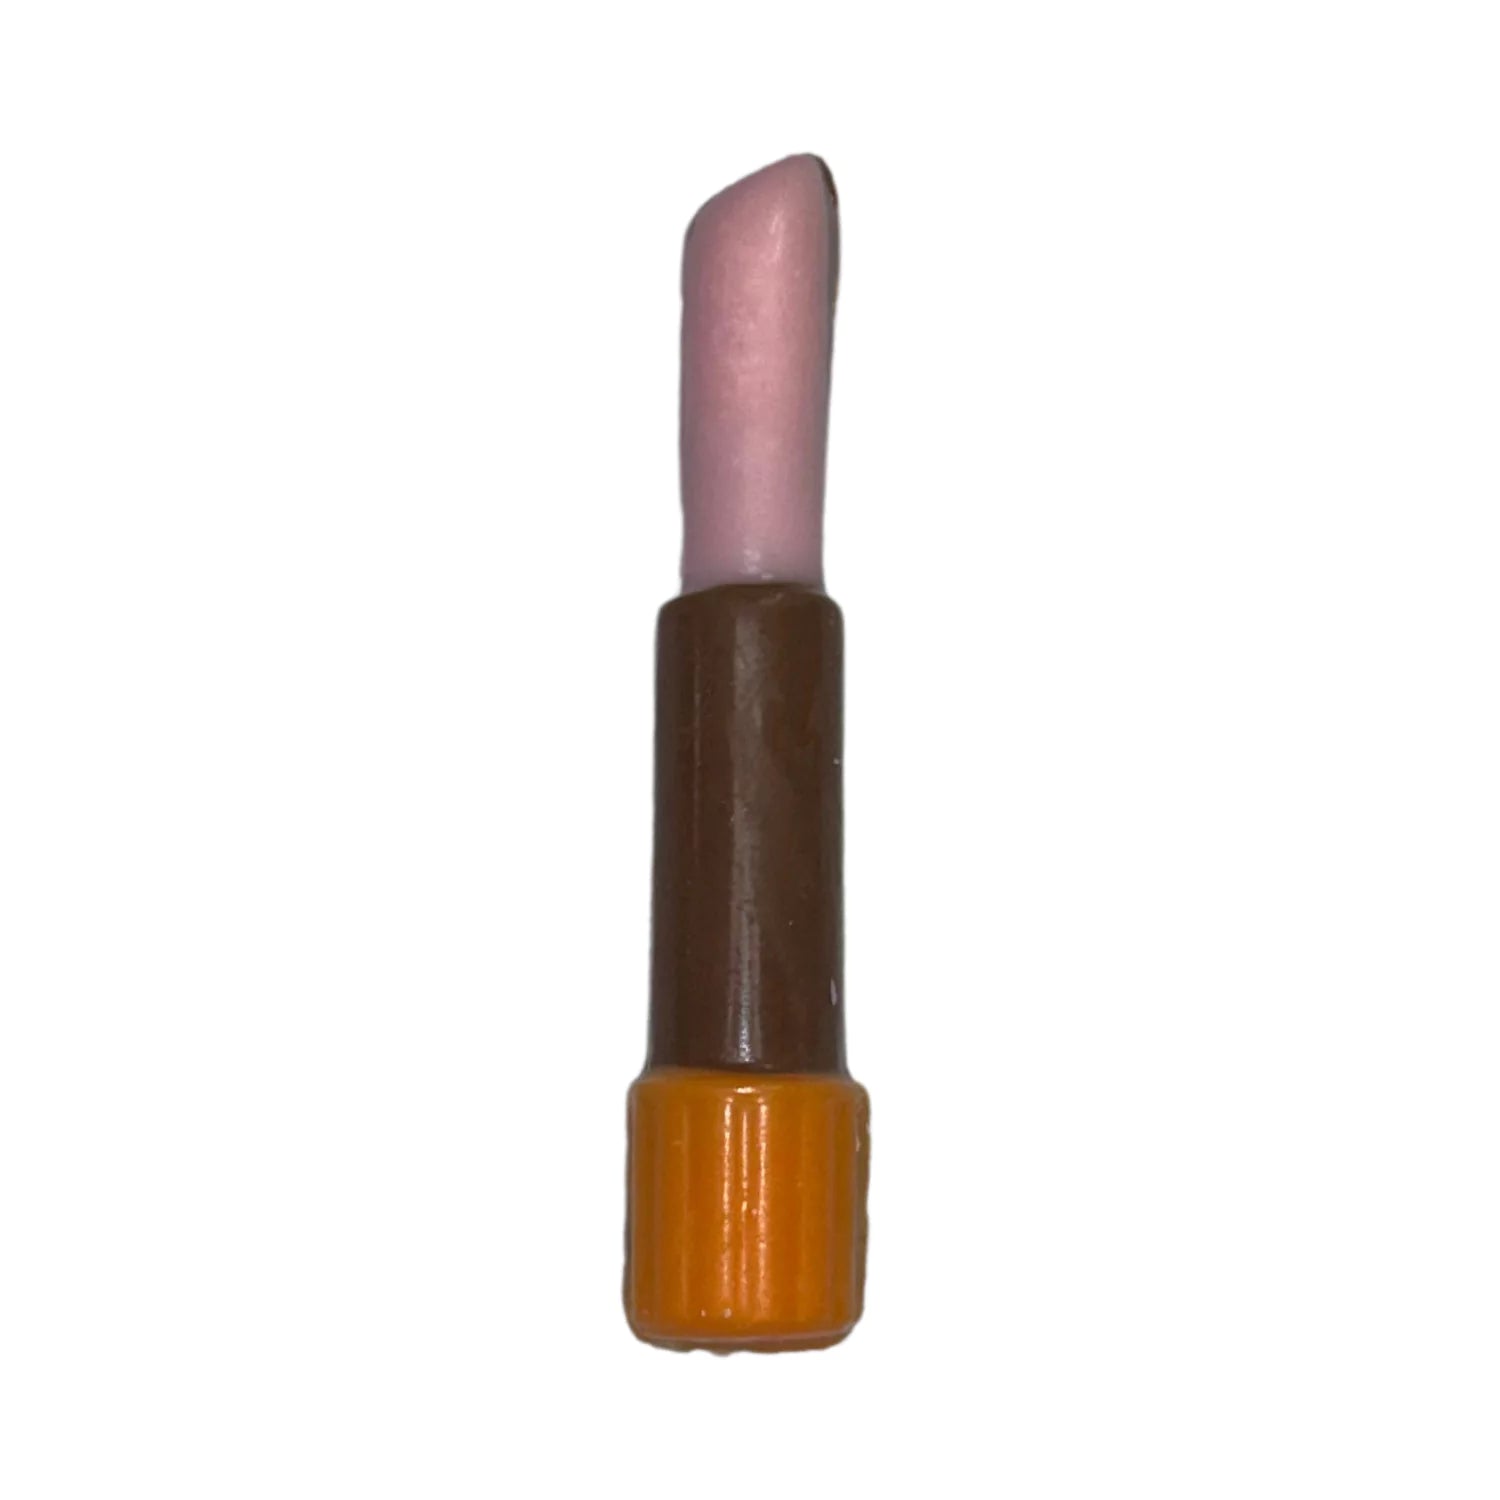 Assorted Colors Lipstick White and Chocolate Milk Chocolate 0.4 oz each Candy Pink Milk Chocolate